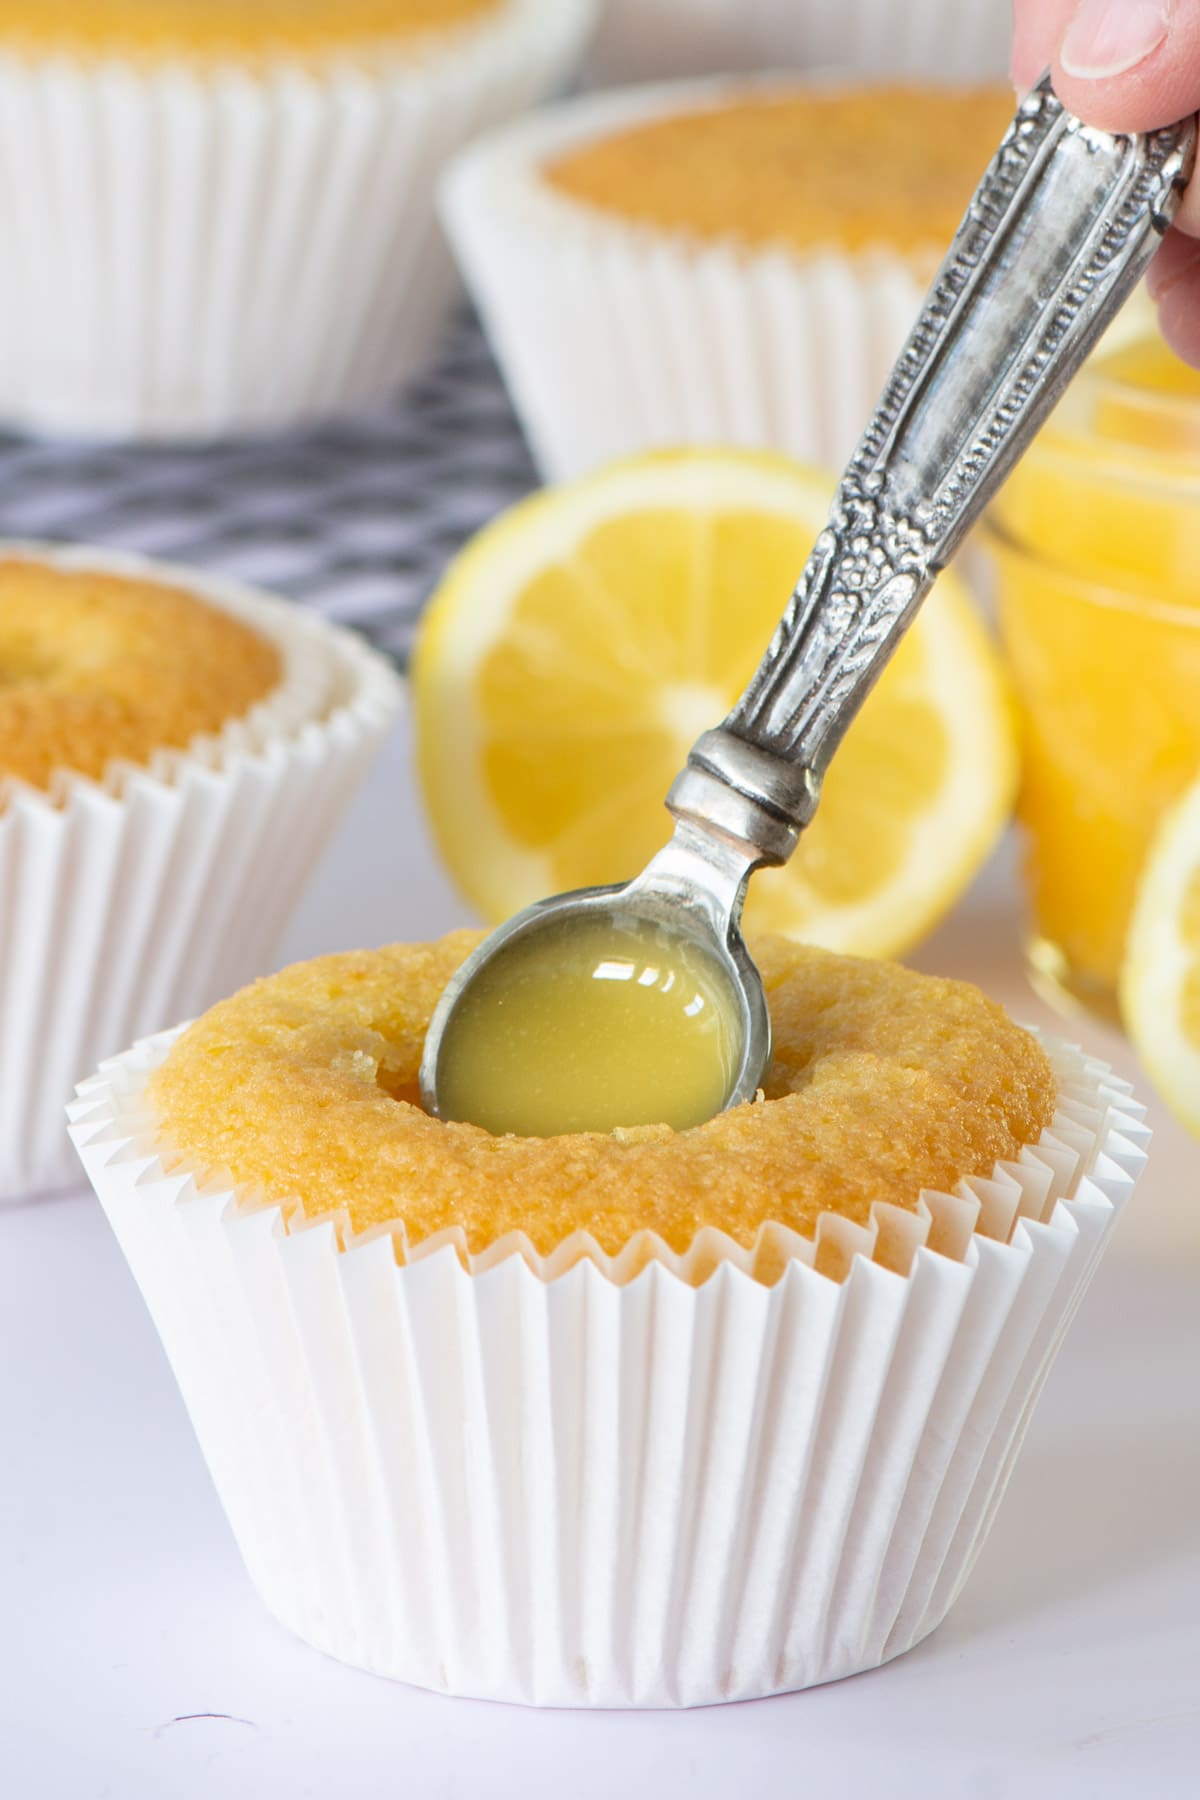 A lemon cupcake being filled with a hidden lemon curd centre. There are other cupcakes and cut lemons in the centre.